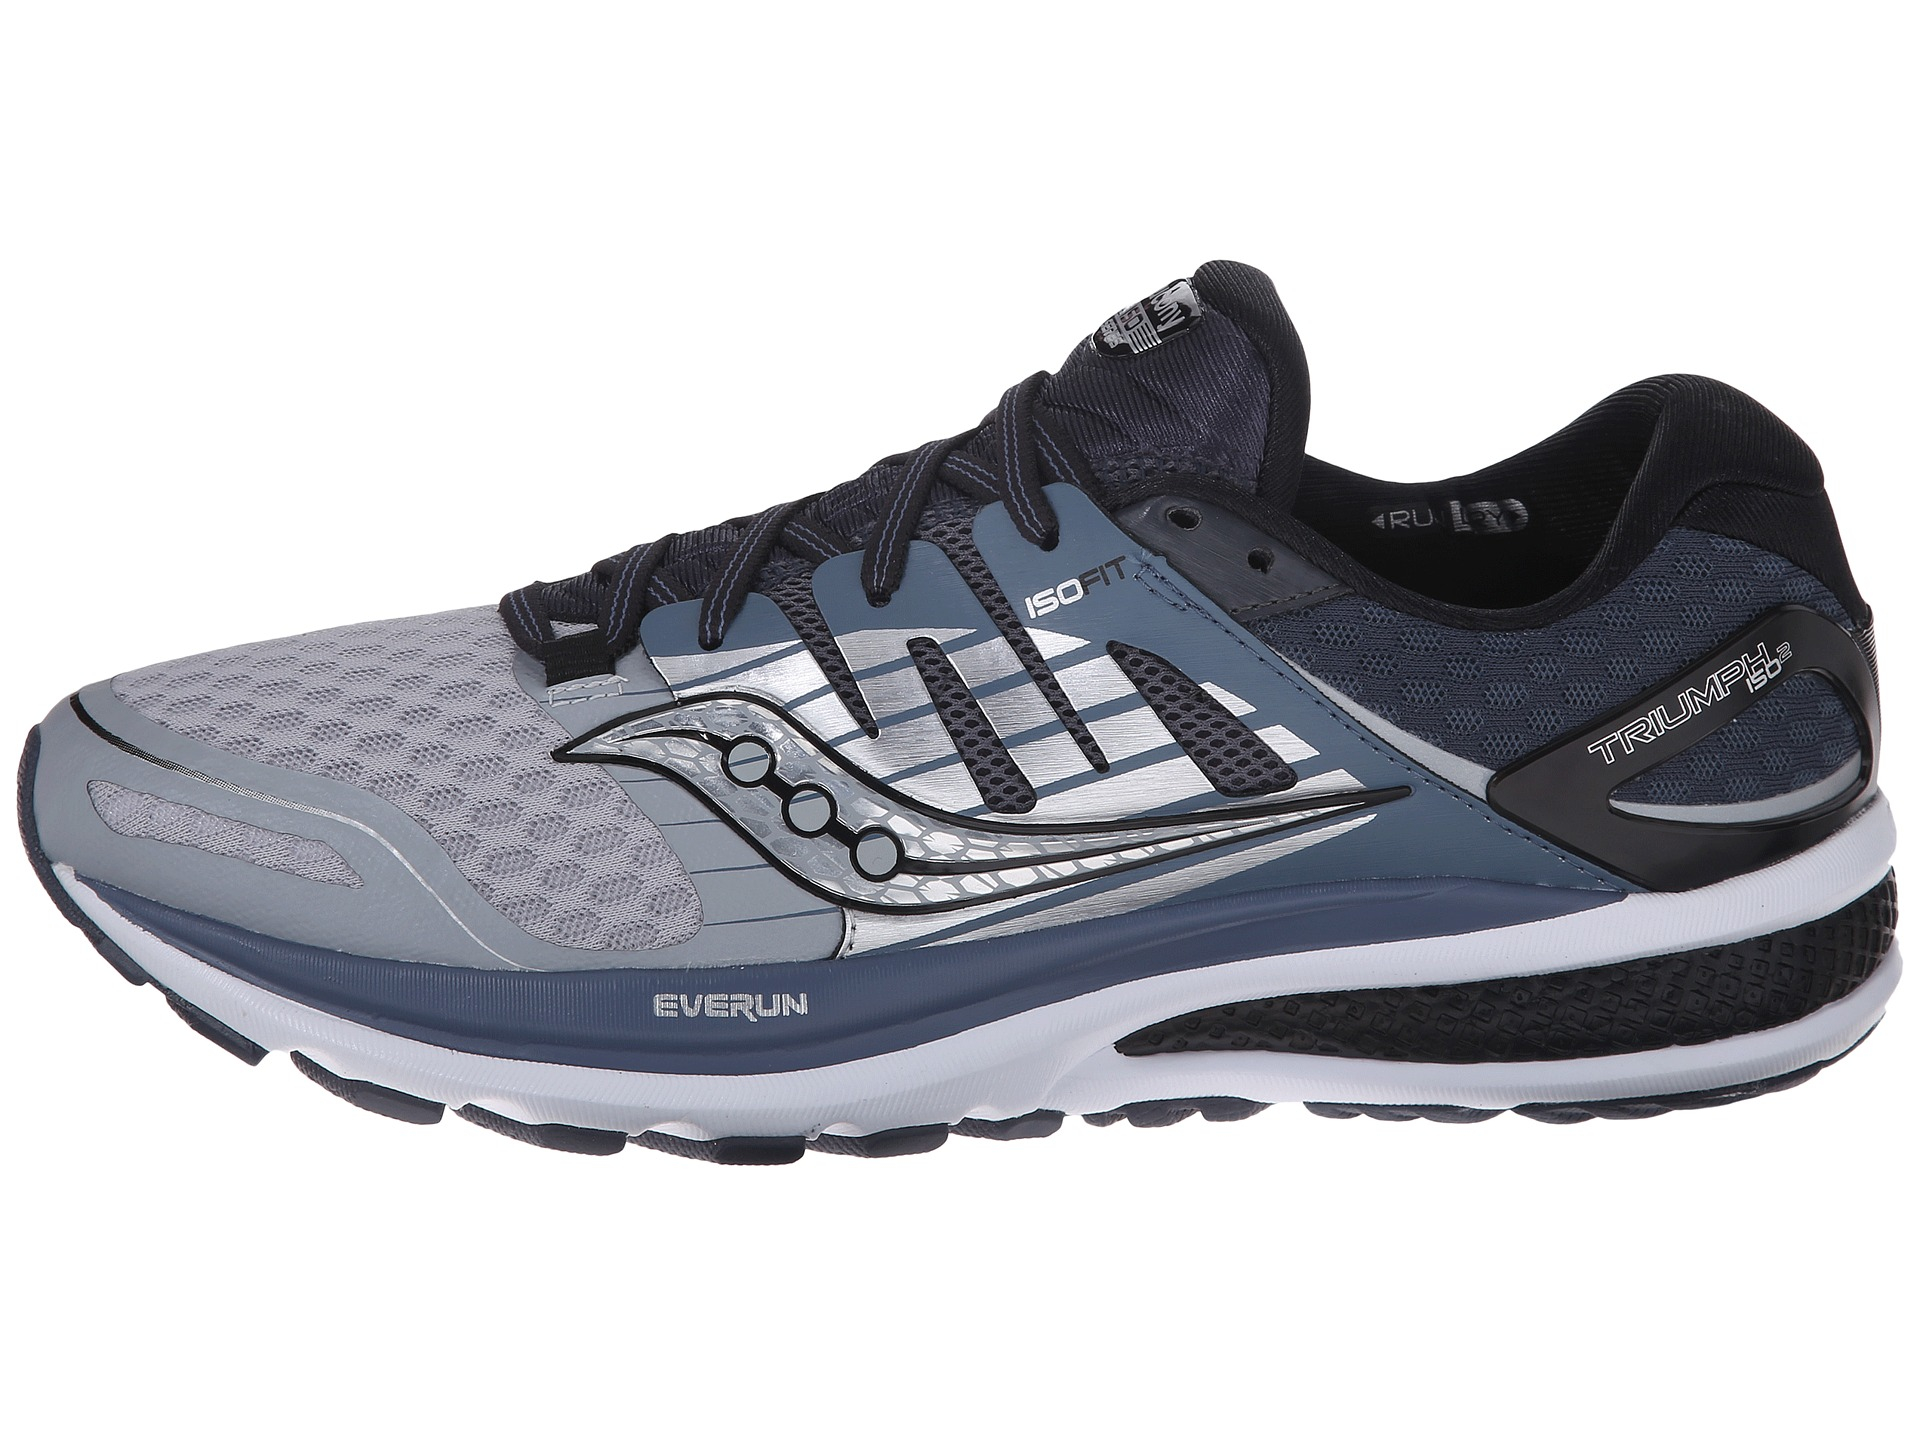 Saucony Synthetic Triumph Iso 2 in Grey 